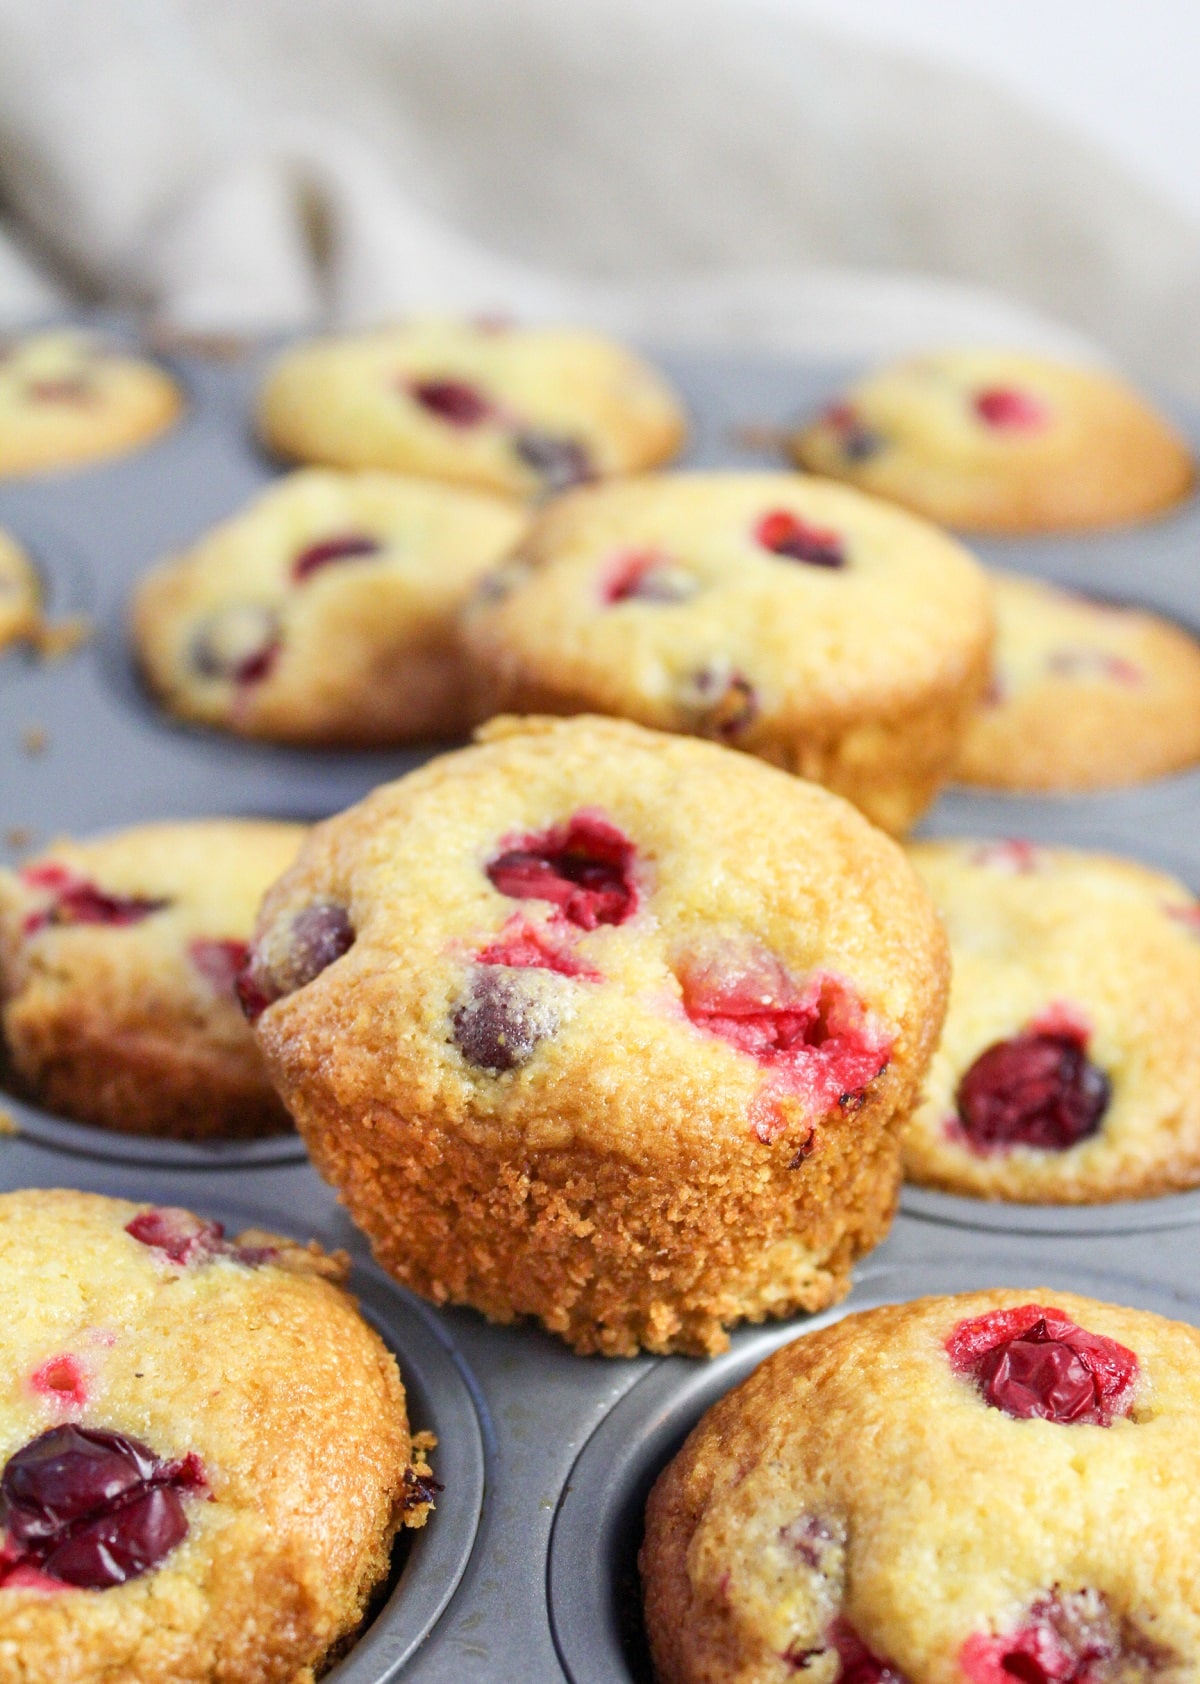 muffins in a muffin tin. Golden brown and topped with fresh cranberries.